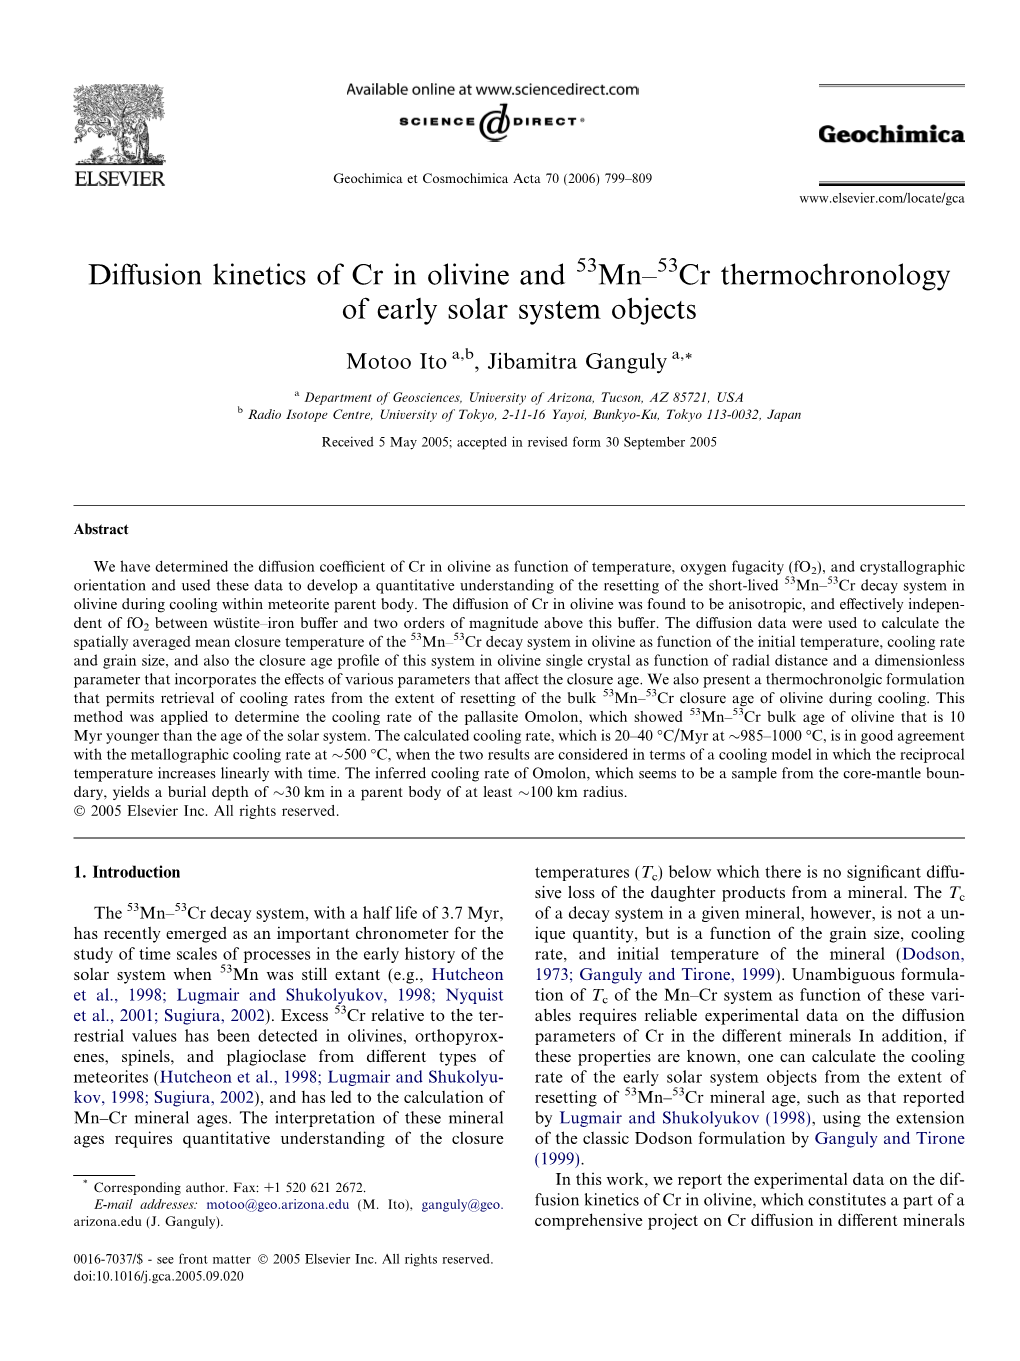 Diffusion Kinetics of Cr in Olivine and Mn